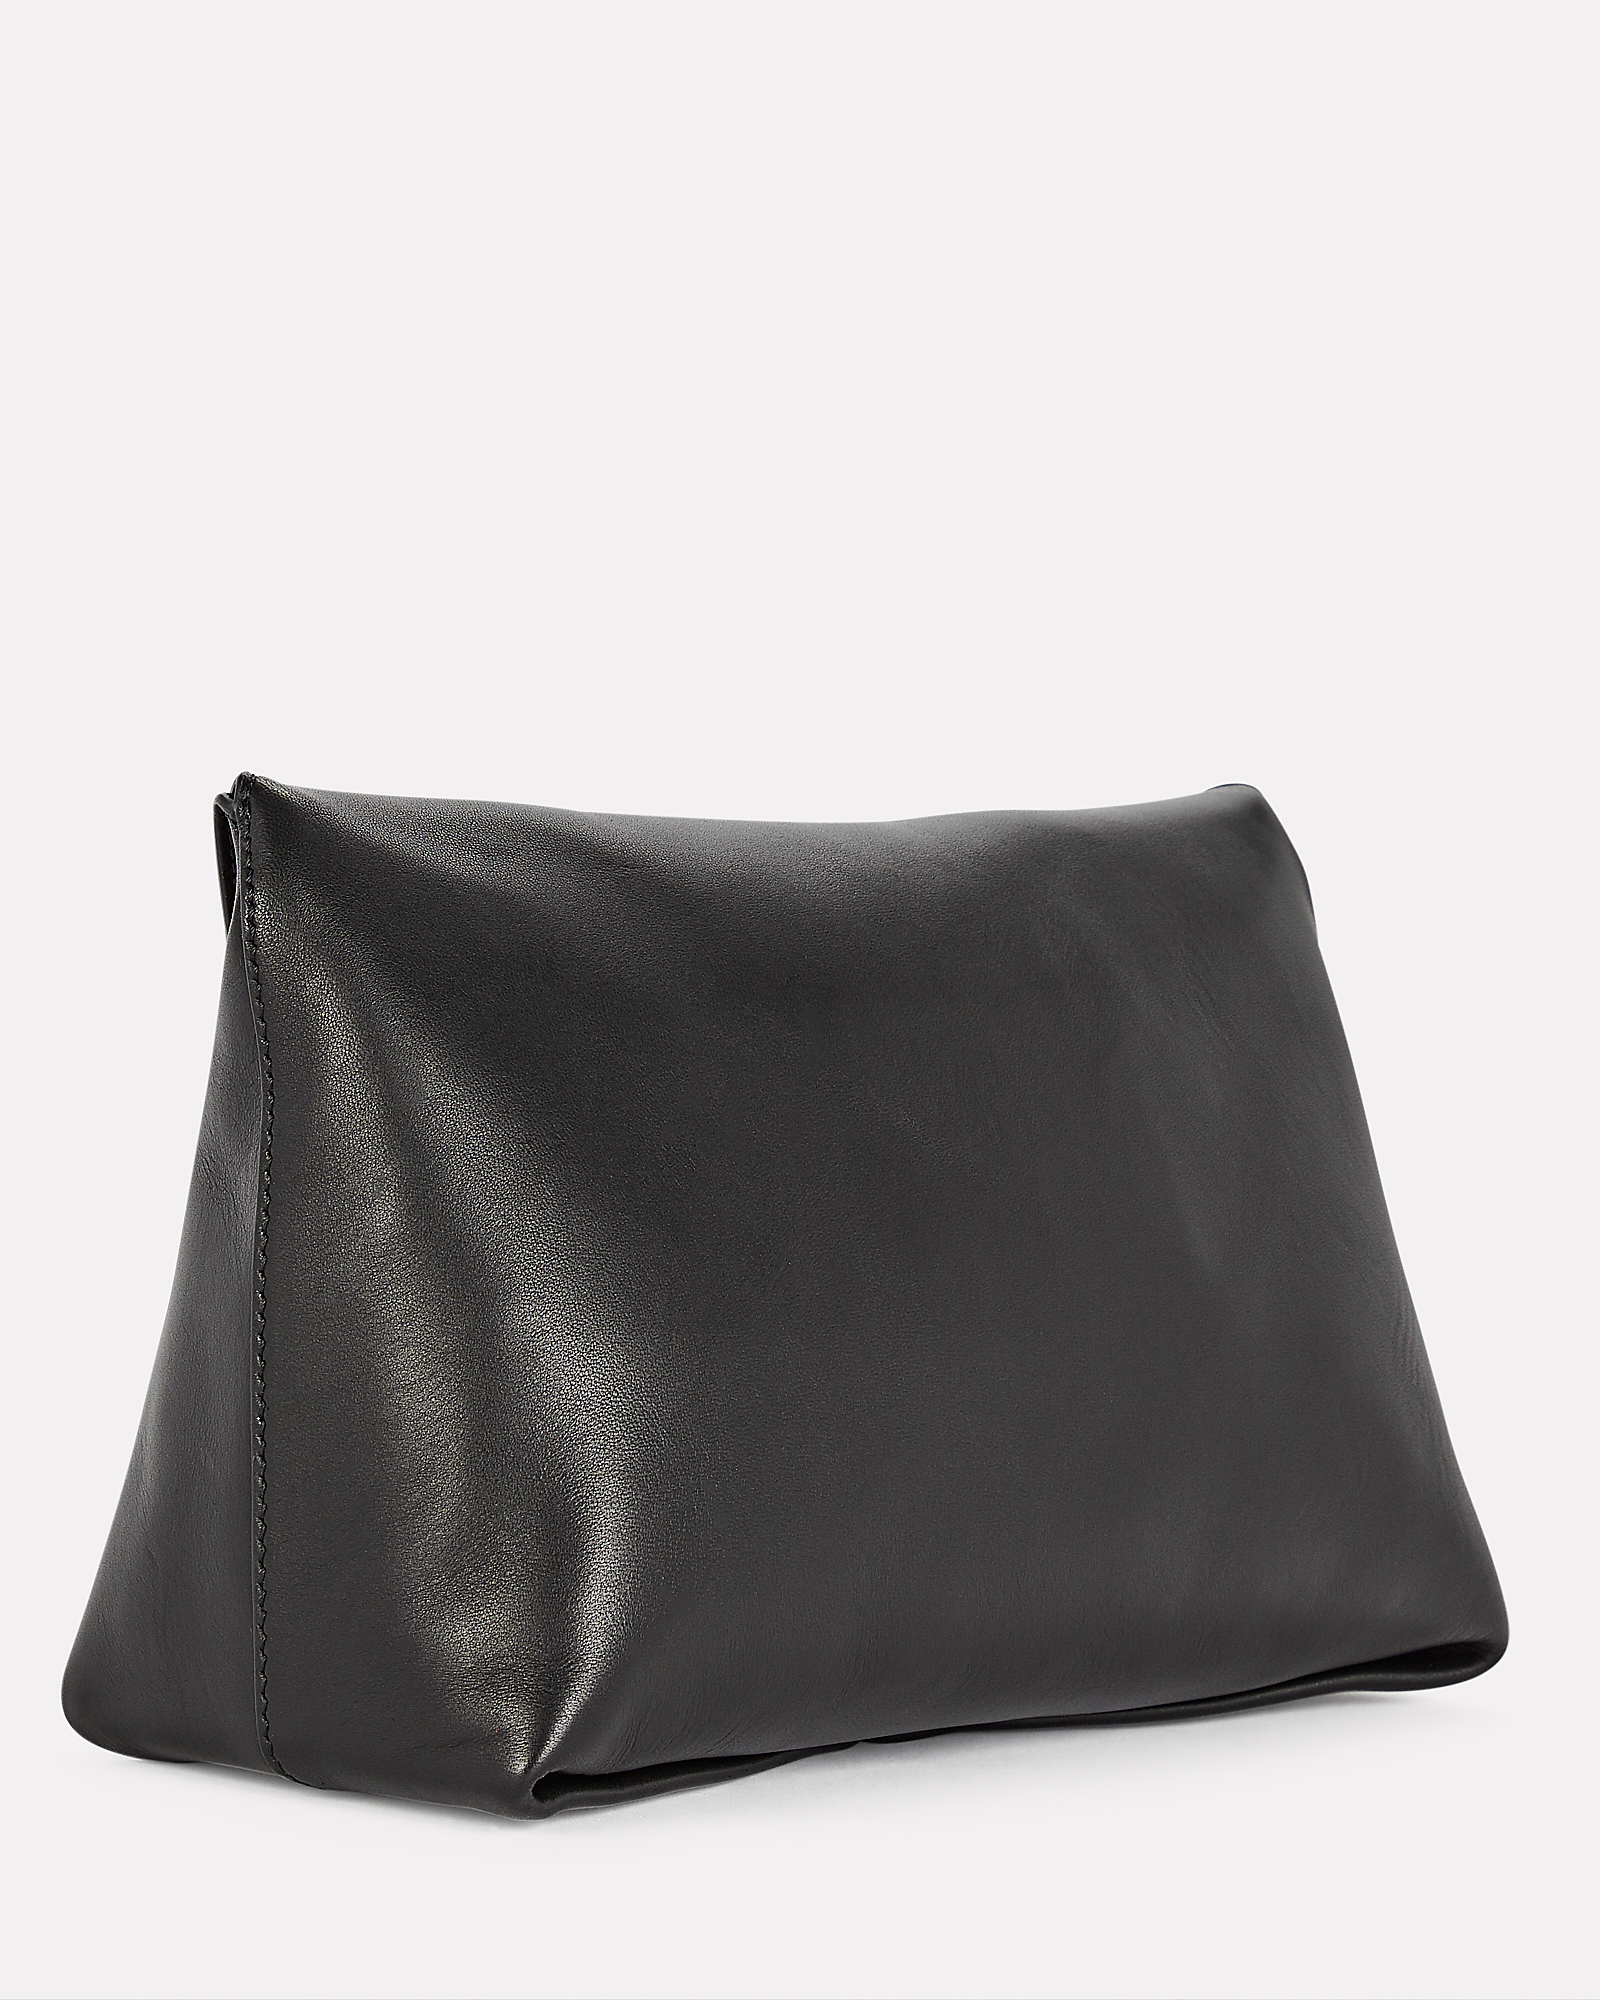 Alexander McQueen Skull Four Ring Leather Pouch | INTERMIX®